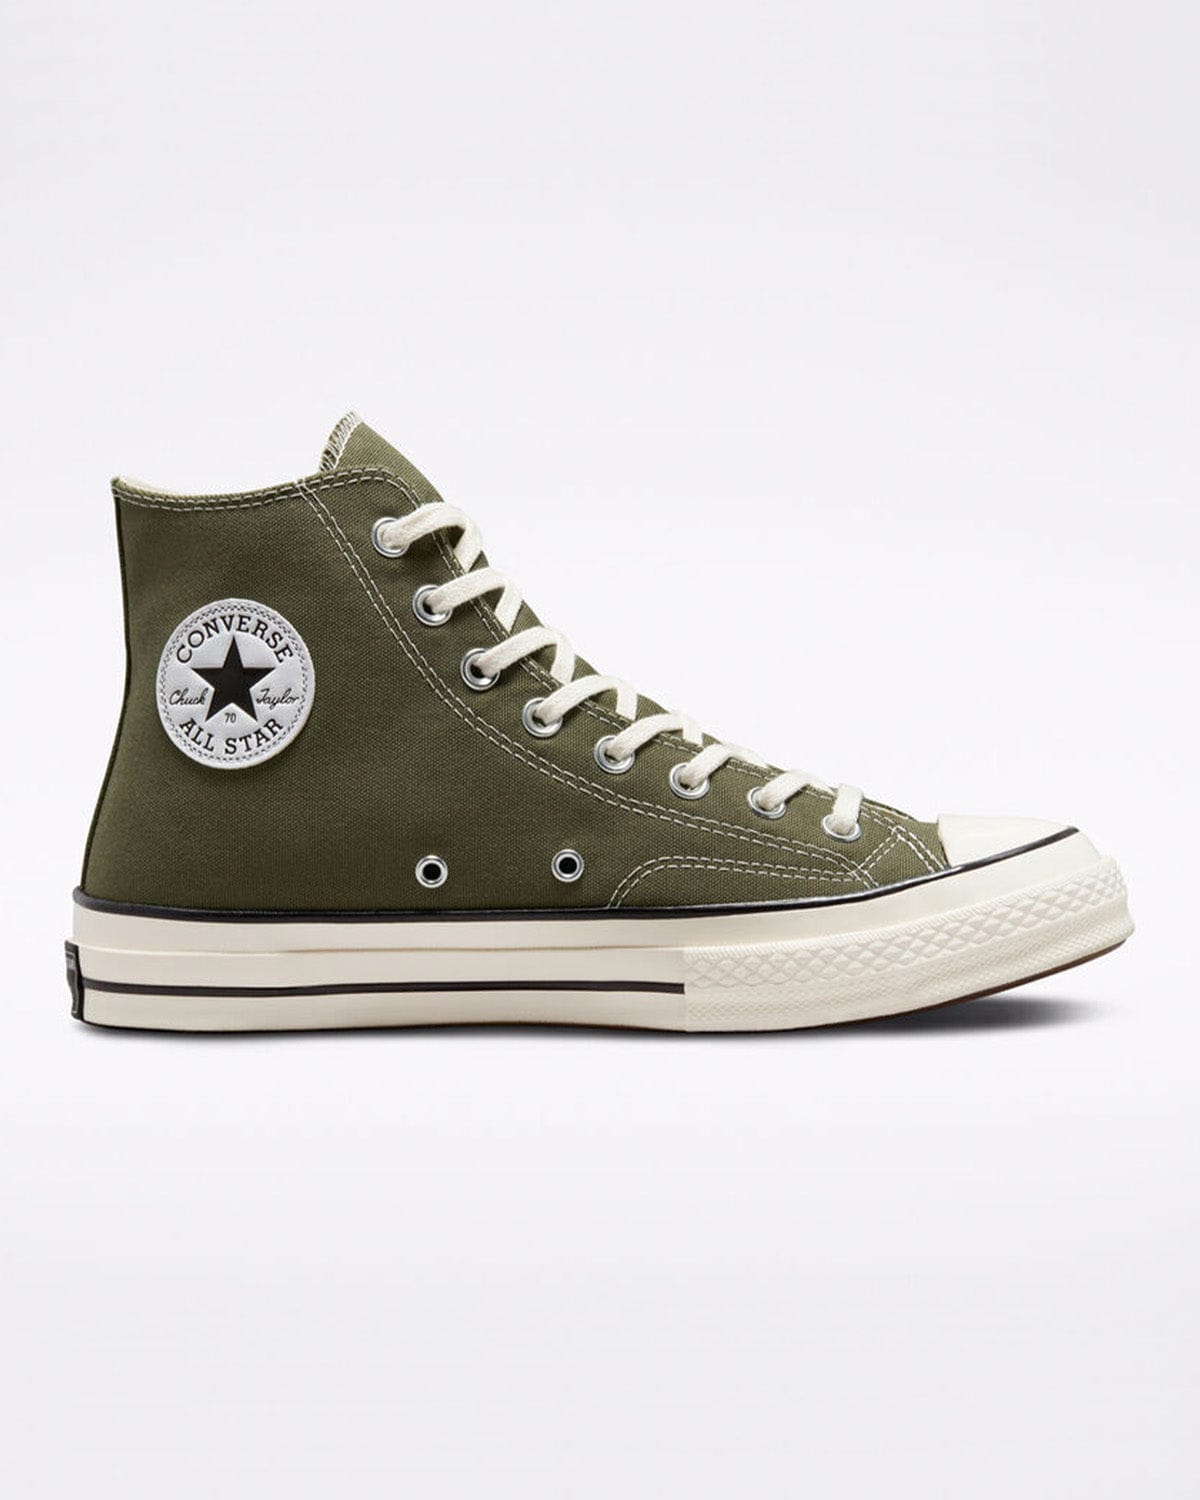 Converse Chuck 70 Hi Utility Green Shoes Sneakers Unisex